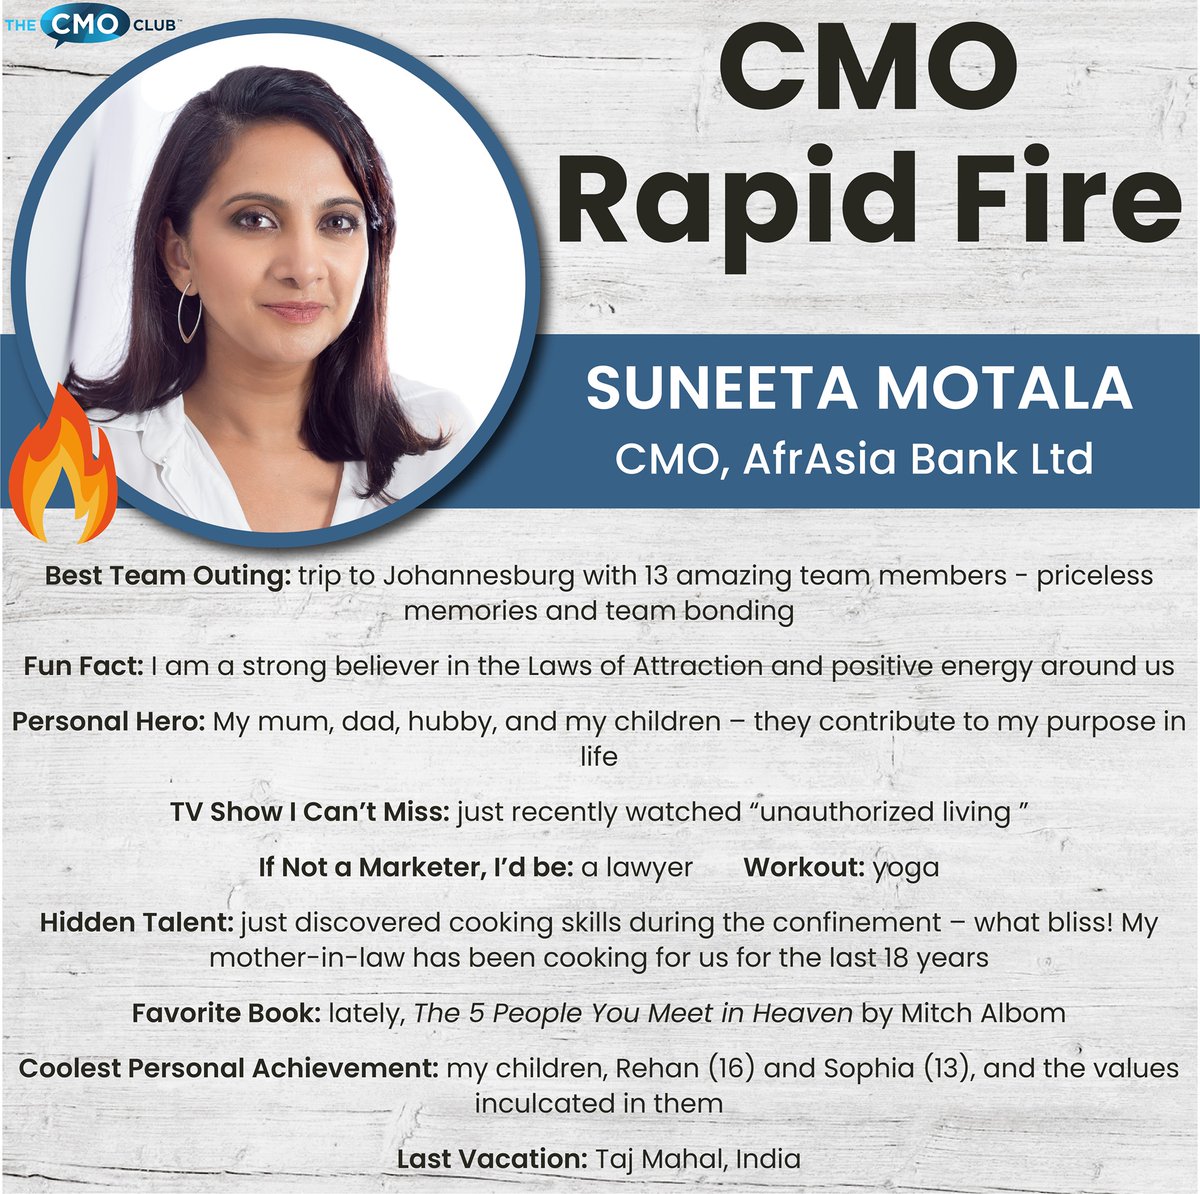 The CMO Club welcomes its first member from Africa: Suneeta Motala.  
Headquartered in US, The CMO Club is the world's most engaged marketing leadership community regrouping +650 CMOs globally.
#CMOrapidFire